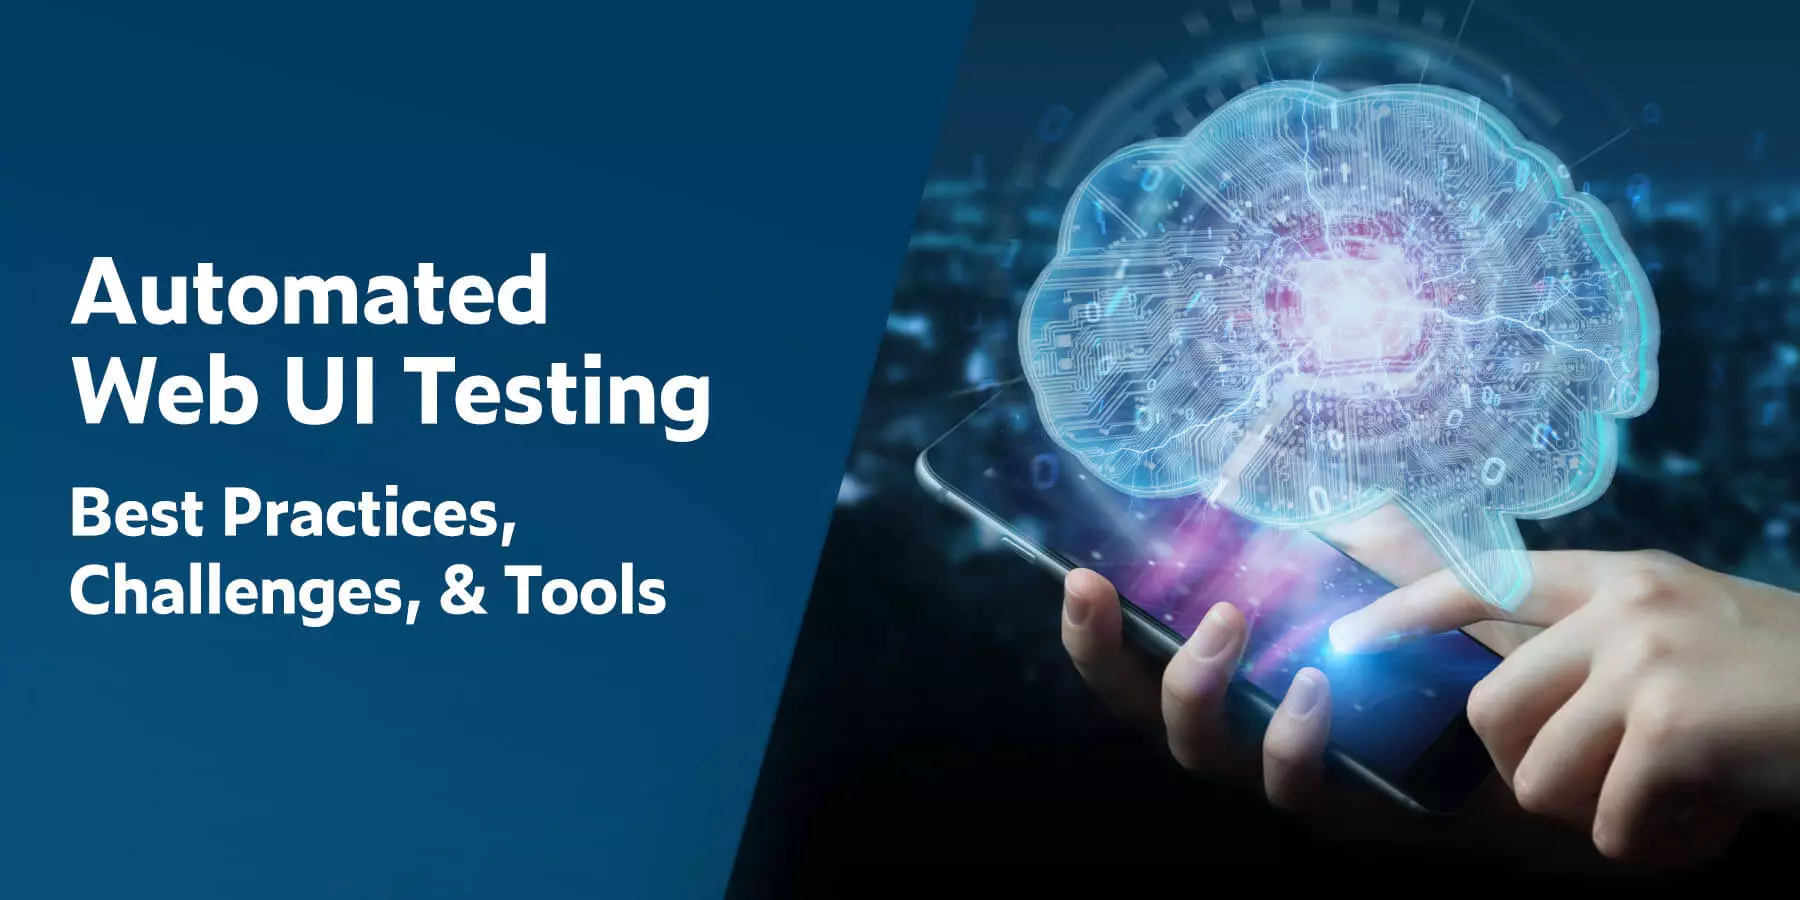 Automated Web UI Testing: Best Practices, Challenges, & Tools